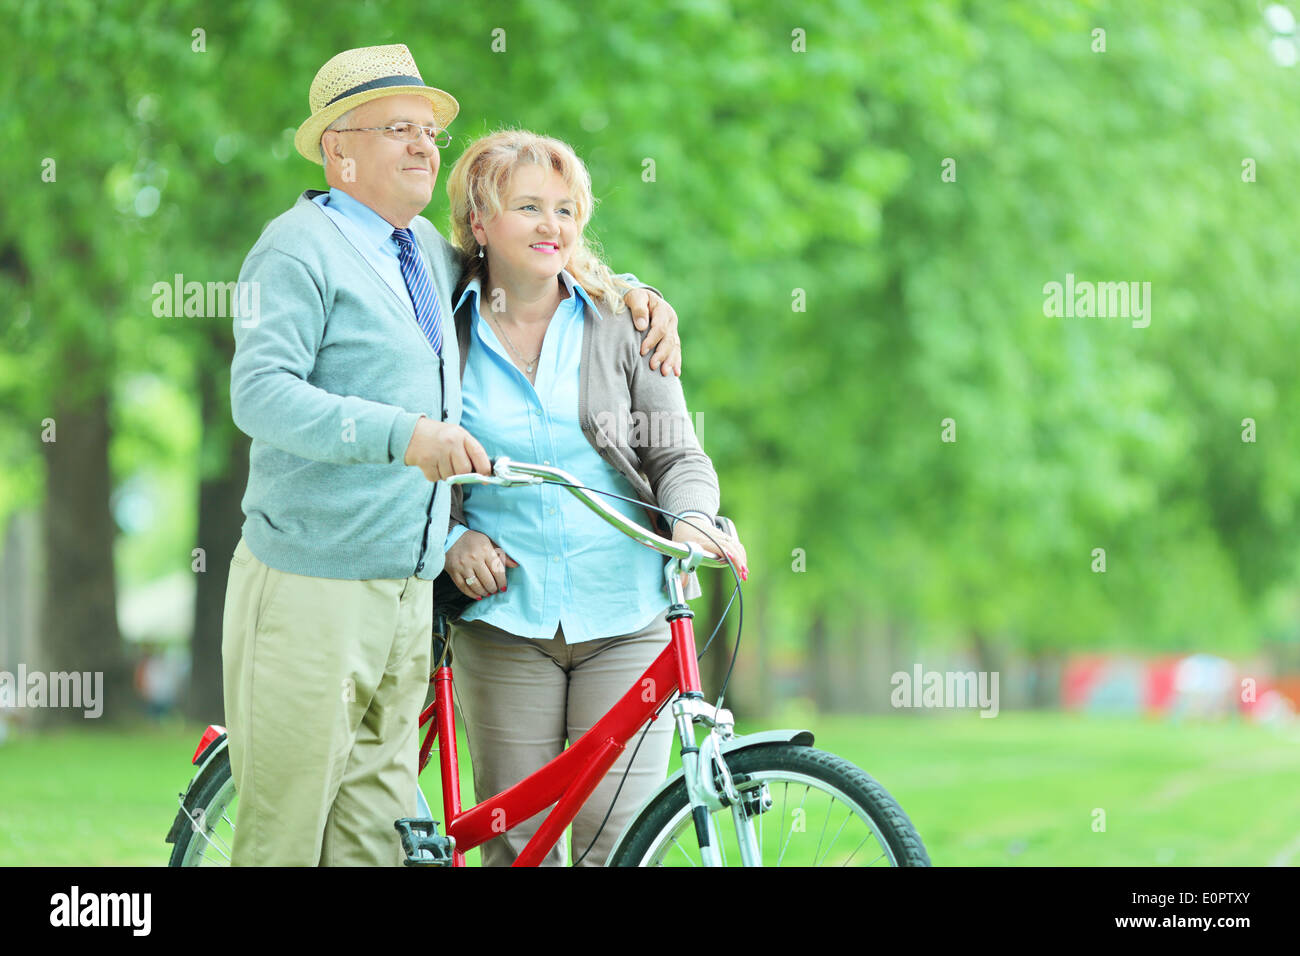 Mature couple hugging and pushing a bicycle in park Stock Photo